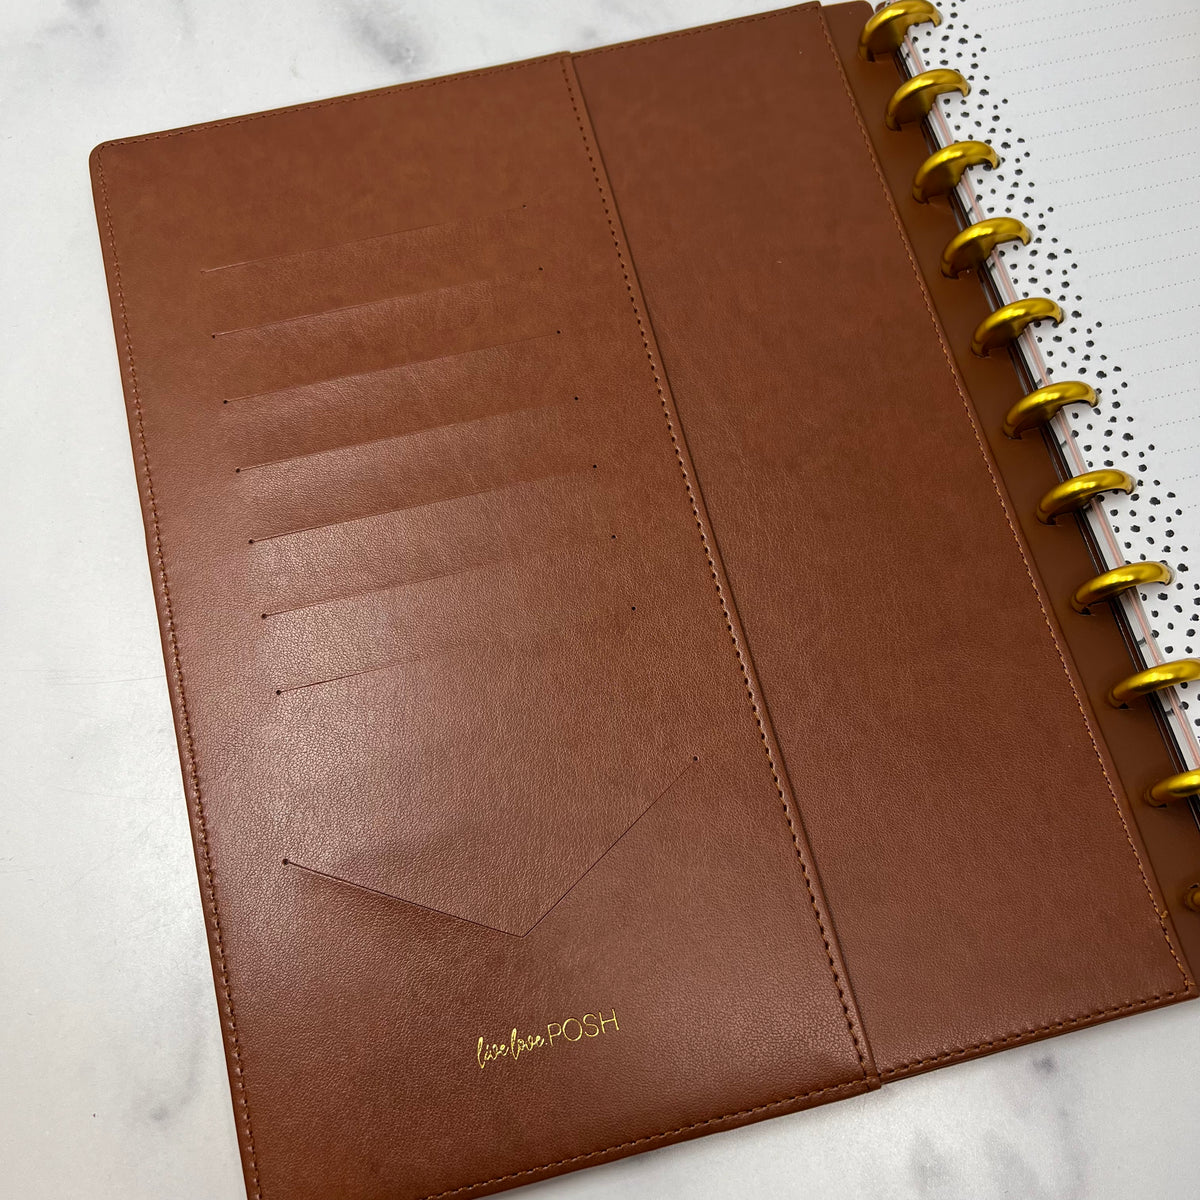 LUXE QUILTED PLANNER COVER SET - CHIC COGNAC – Live Love Posh